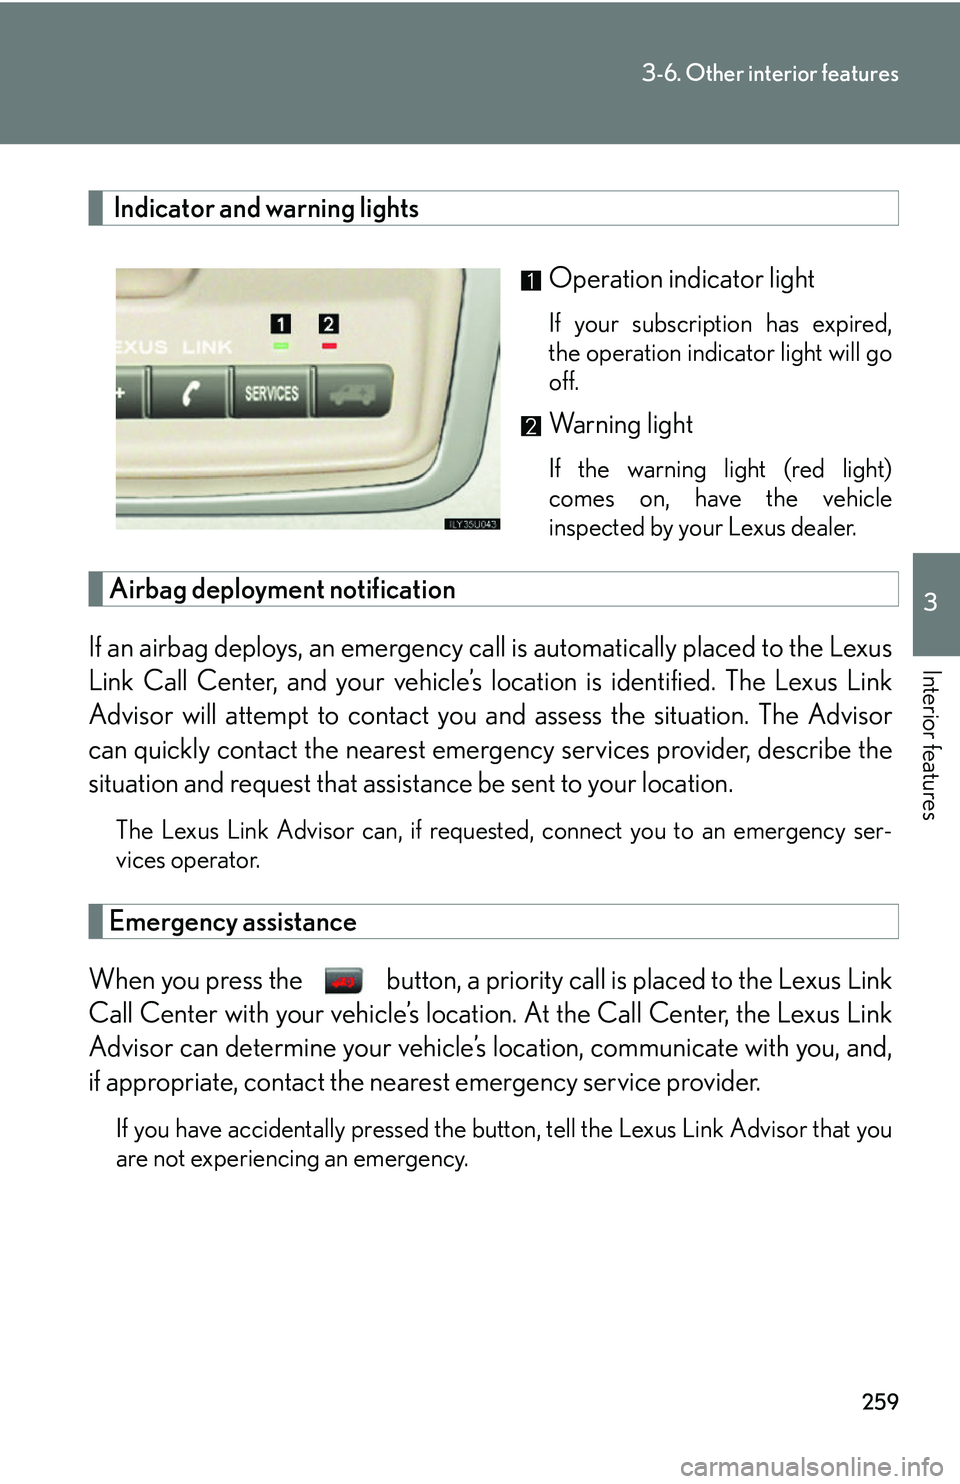 Lexus GX470 2007  Theft deterrent system / LEXUS 2007 GX470 OWNERS MANUAL (OM60C64U) 259
3-6. Other interior features
3
Interior features
 Indicator and warning lightsOperation indicator light
If your subscription has expired,
the operation indicator light will go
off.
Warning light
I